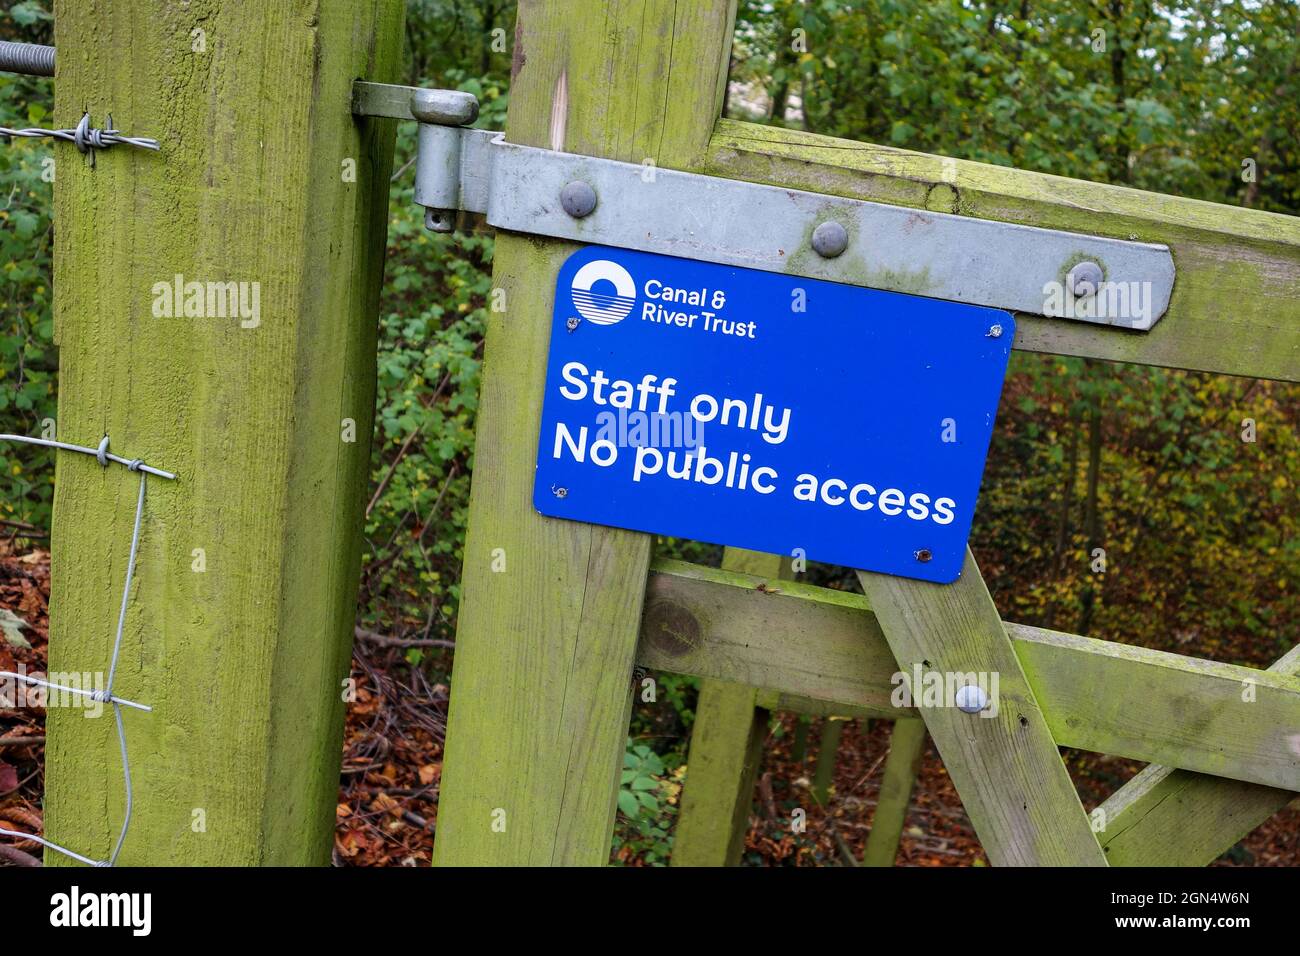 A sign erected by The Canal and River Trust saying 'Staff only No public access', England, UK Stock Photo